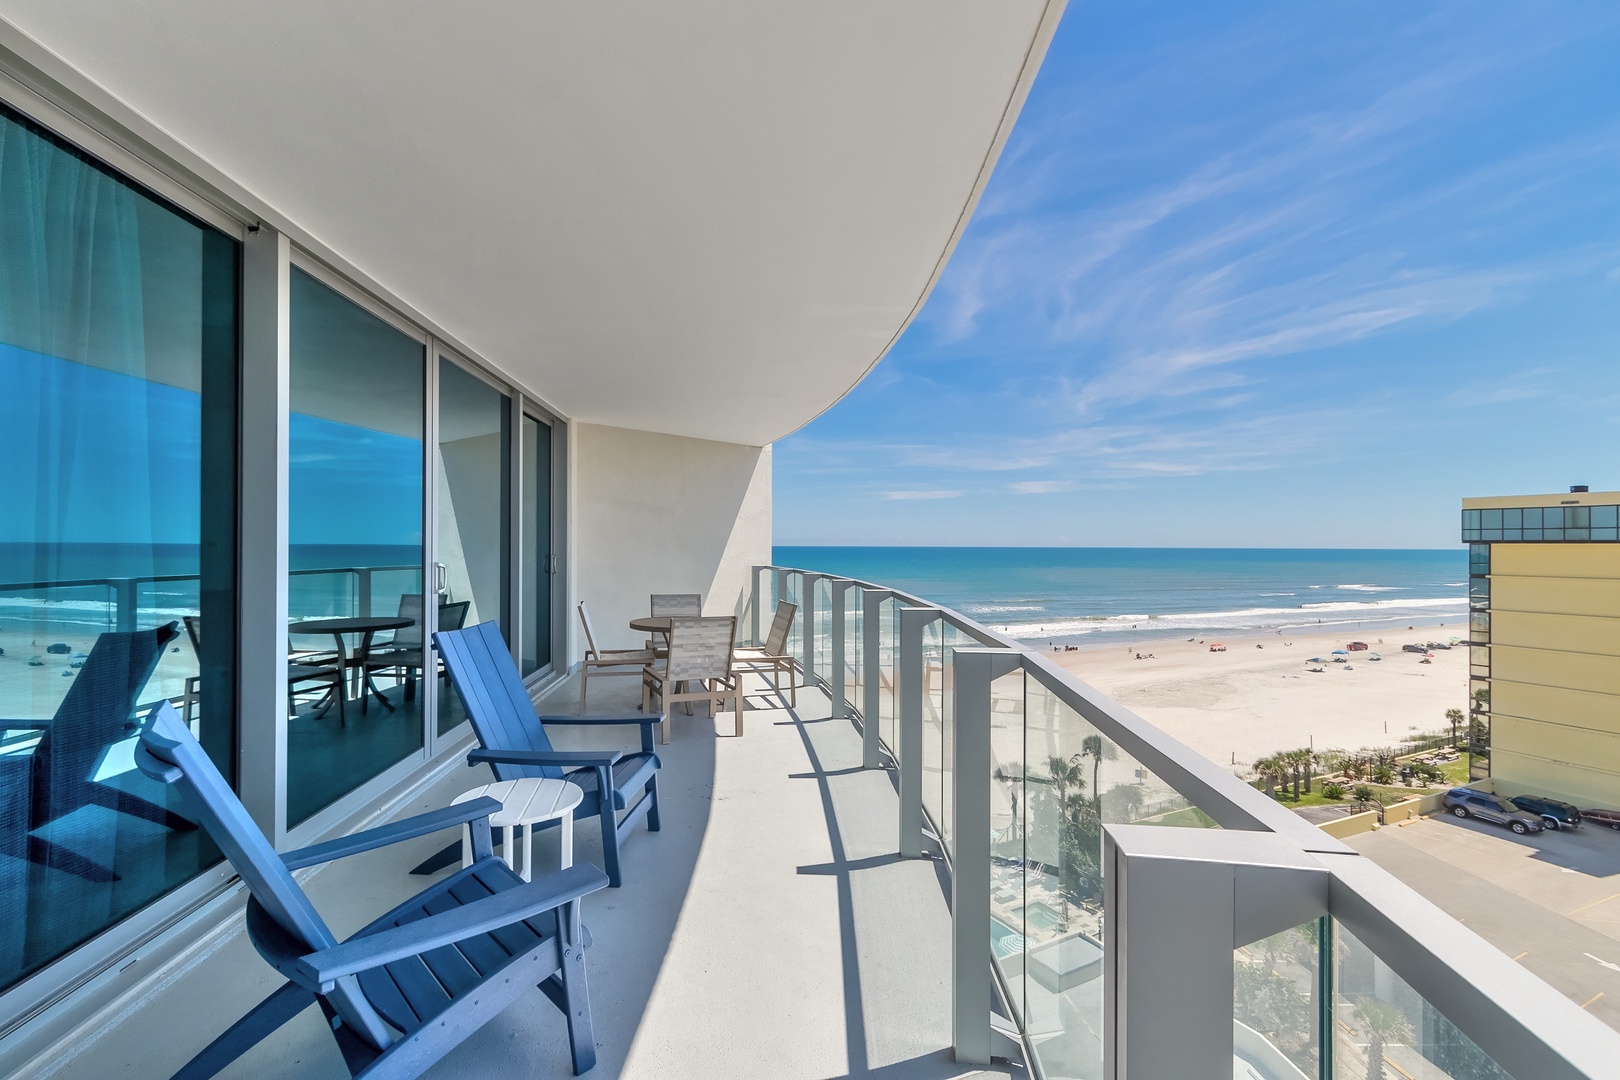 Breathe in the Salt Air: Lounge on Your Balcony Overlooking the Atlantic